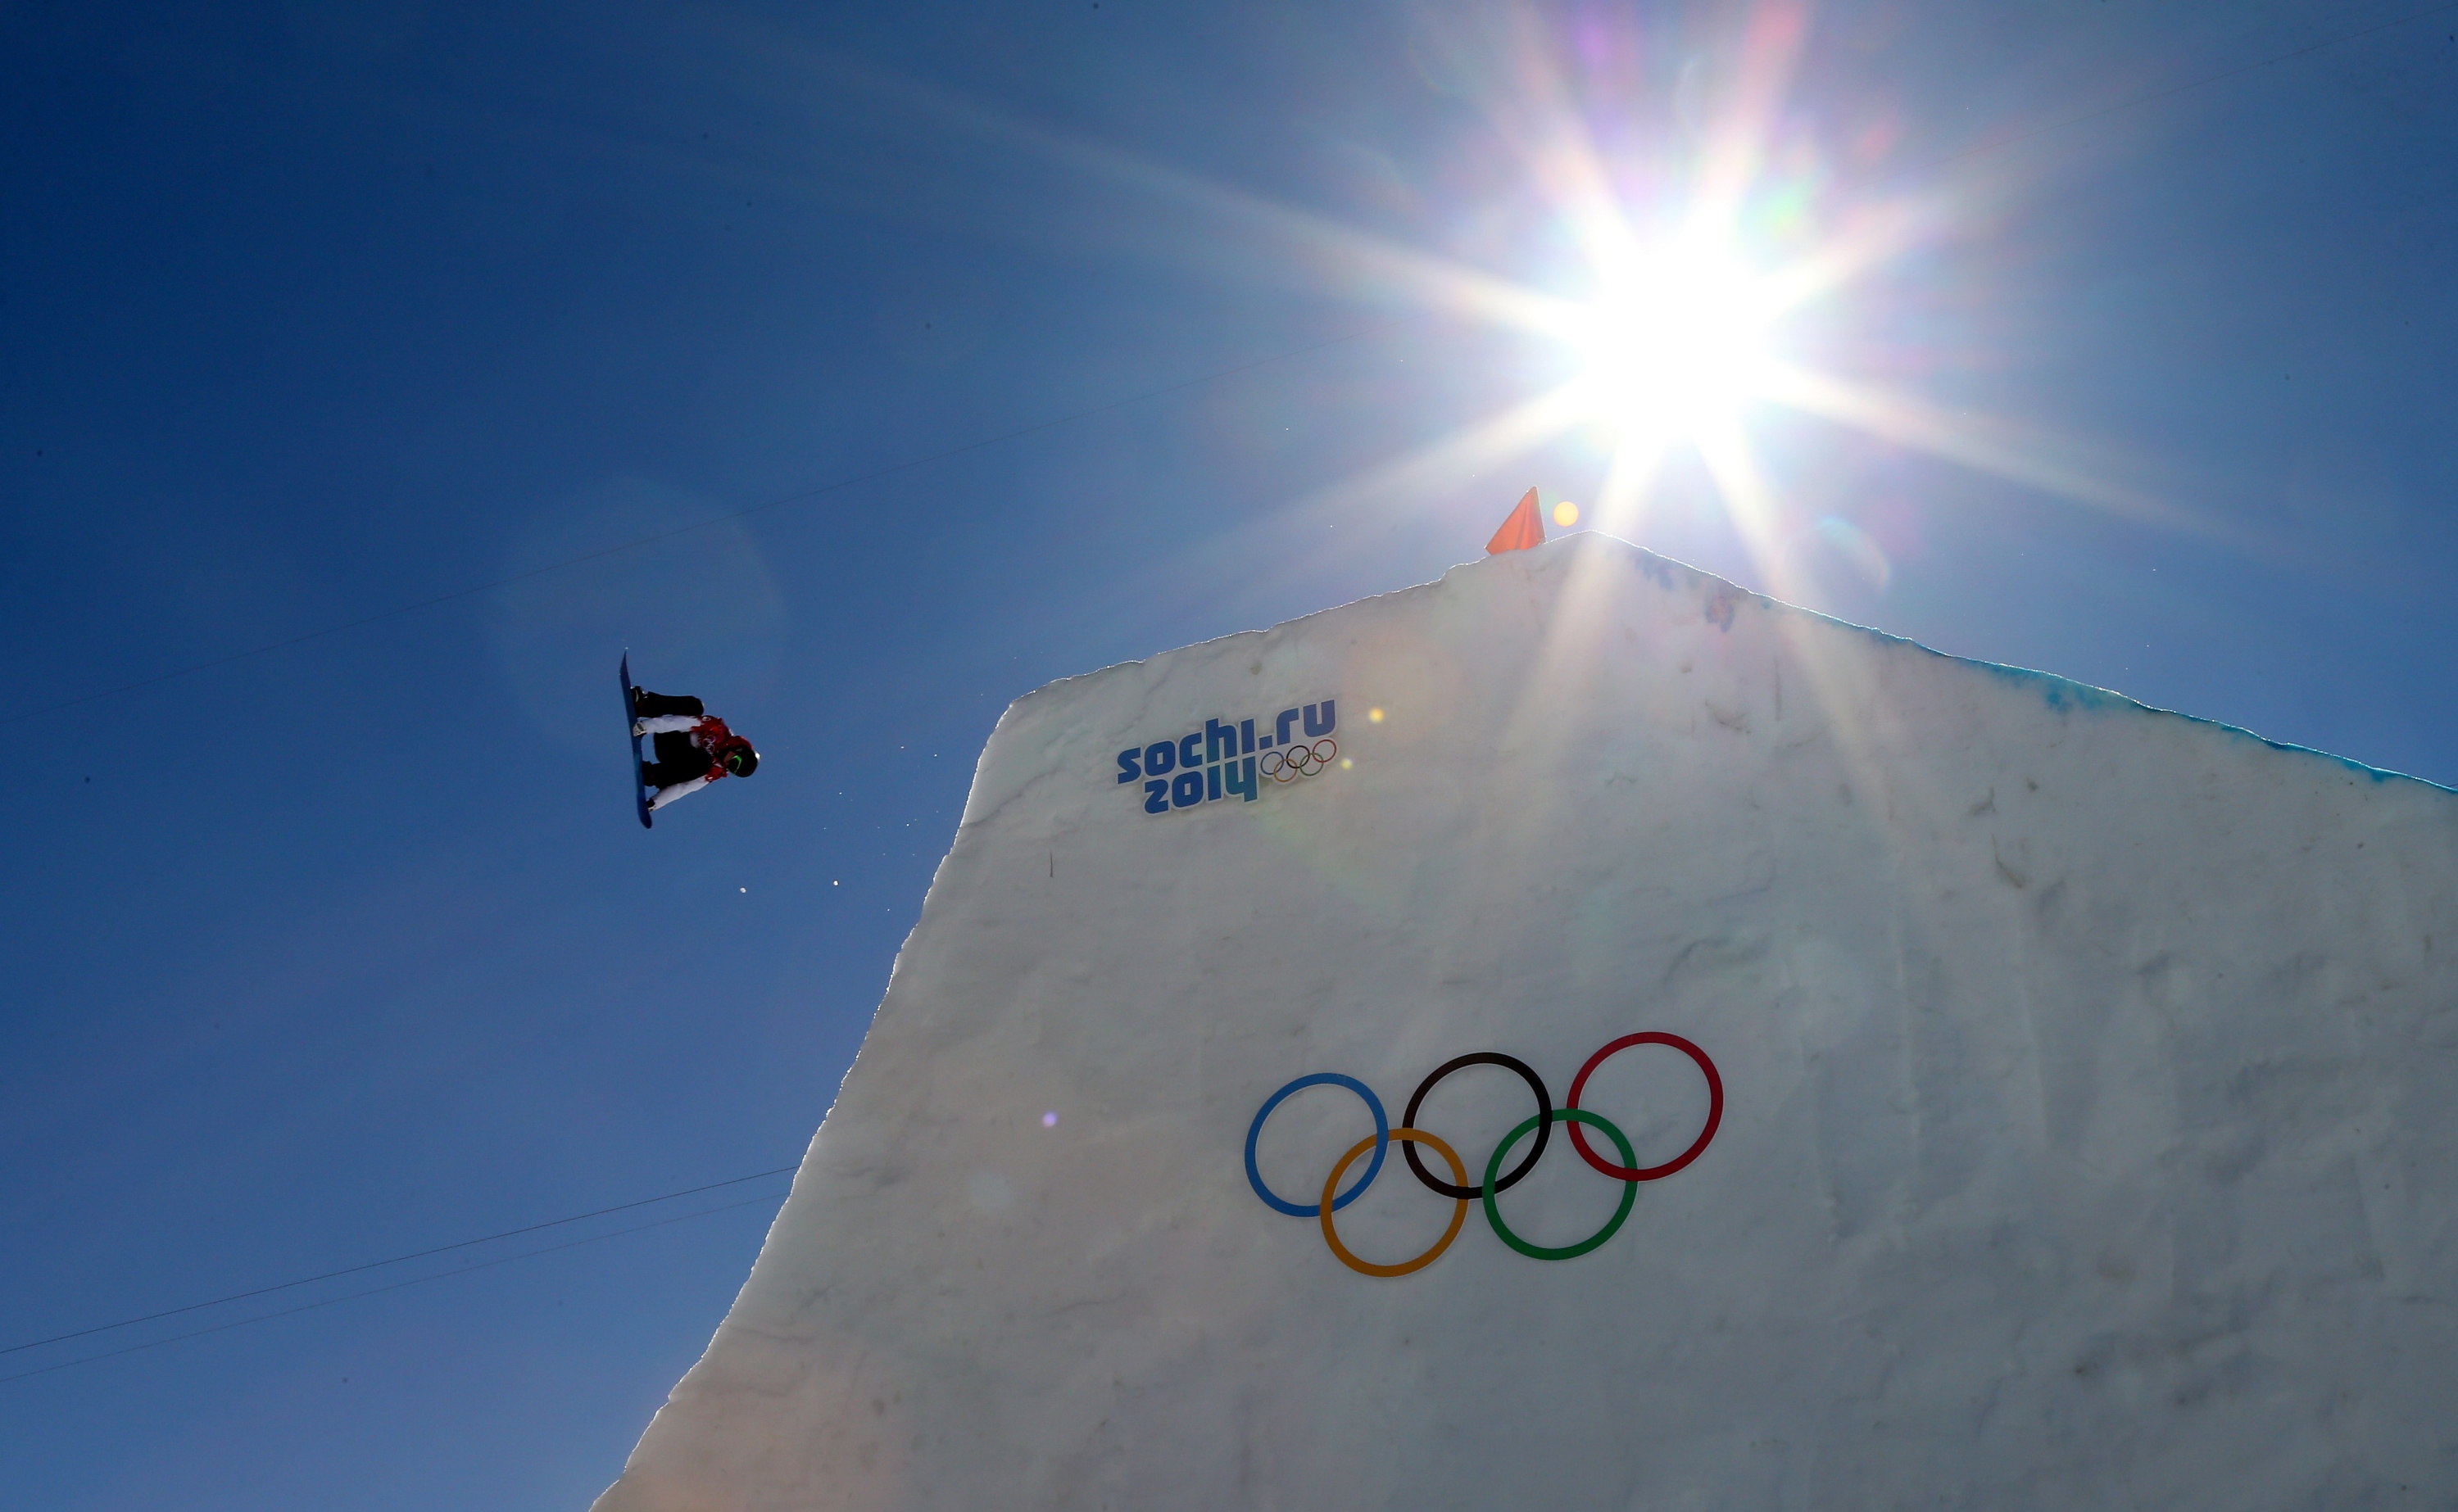 Springboard On Track For Snowboarding At The Olympics In